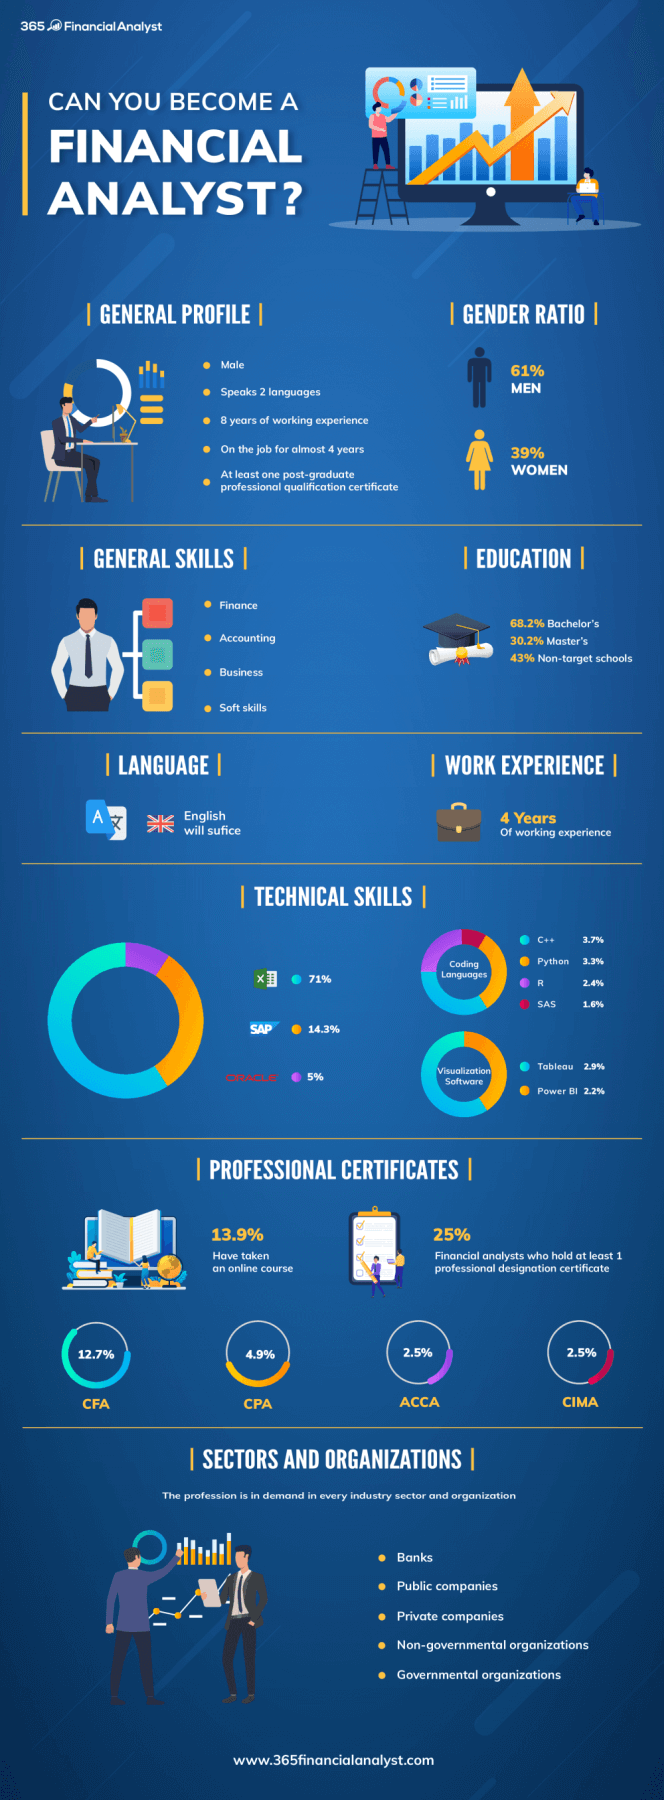 Can You Become a Financial Analyst Infographic